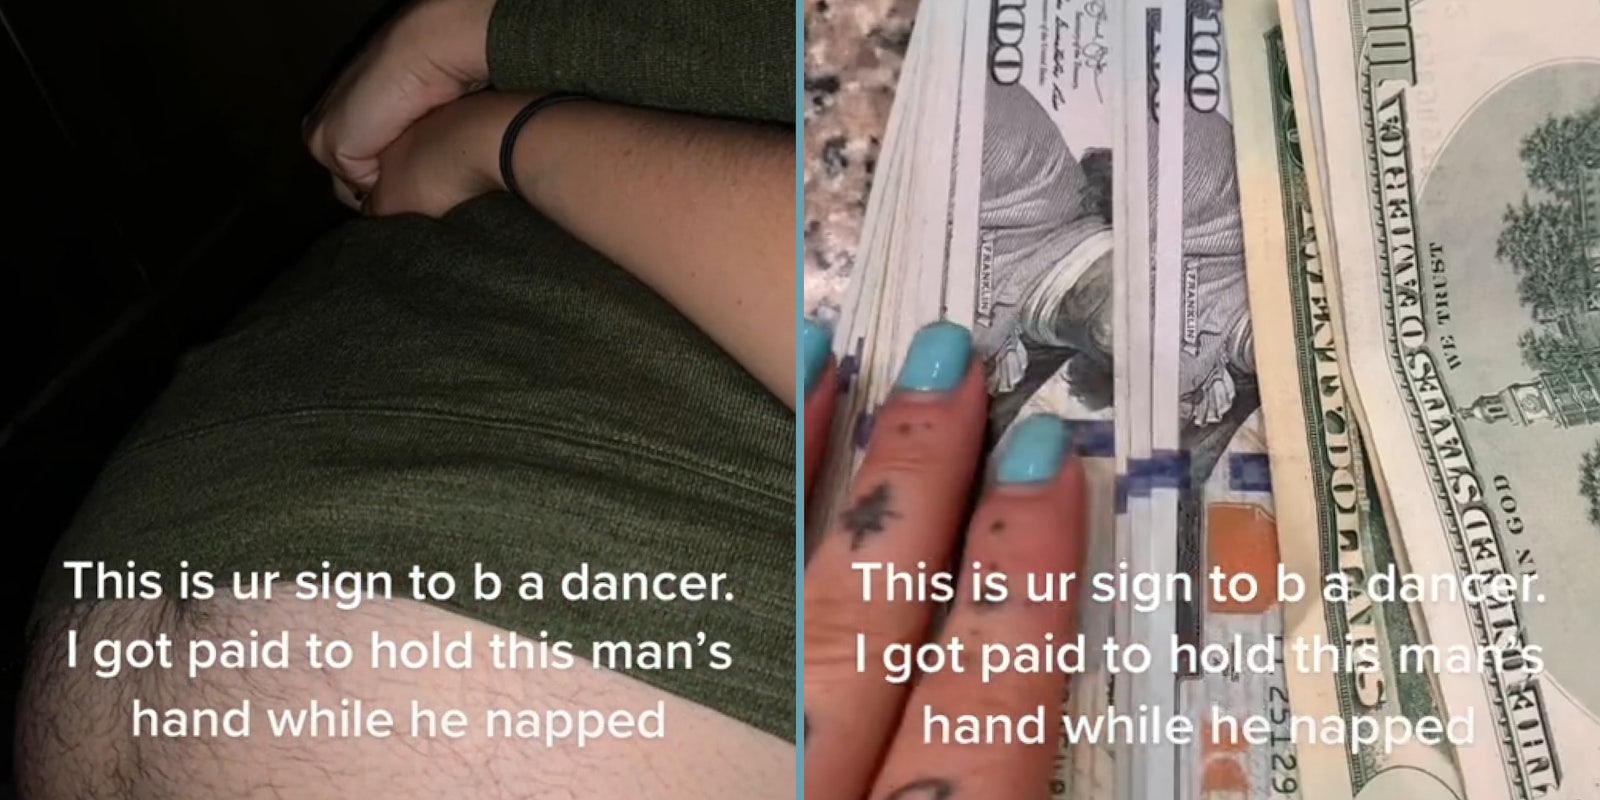 woman holding larger mans hand caption 'This is ur sign to b a dancer. I got paid to hold this man's hand while he napped' (l) Woman hand with tattoos touching sprawled out money on counter caption 'This is ur sign to b a dancer. I got paid to hold this man's hand while he napped' (r)